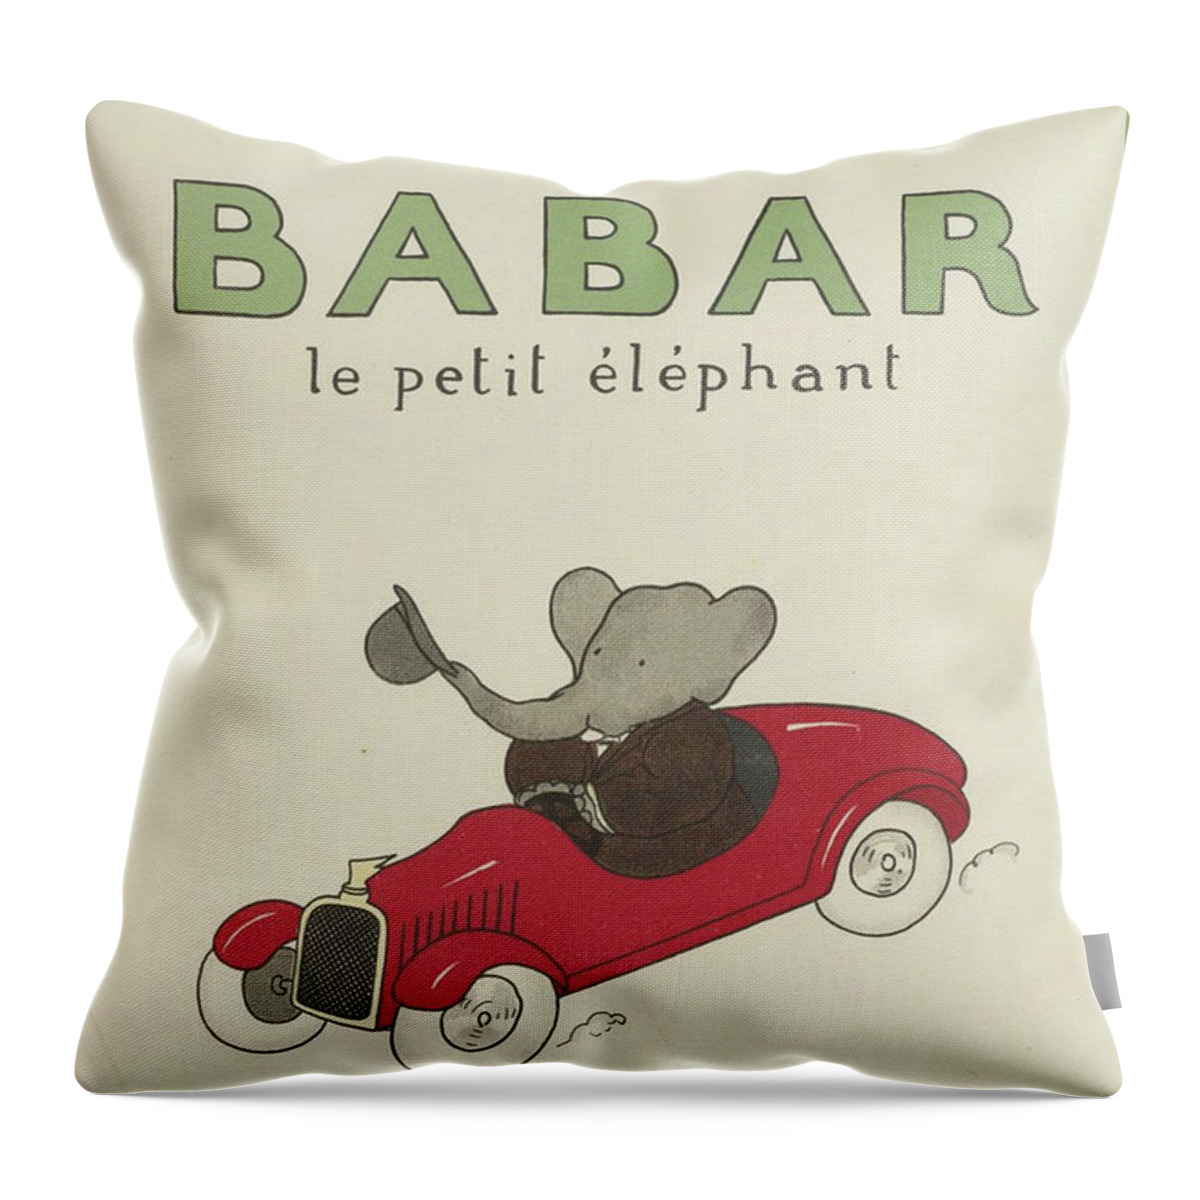 L'histoire De Babar Throw Pillow featuring the drawing Babar #3 by Jean de Brunhoff